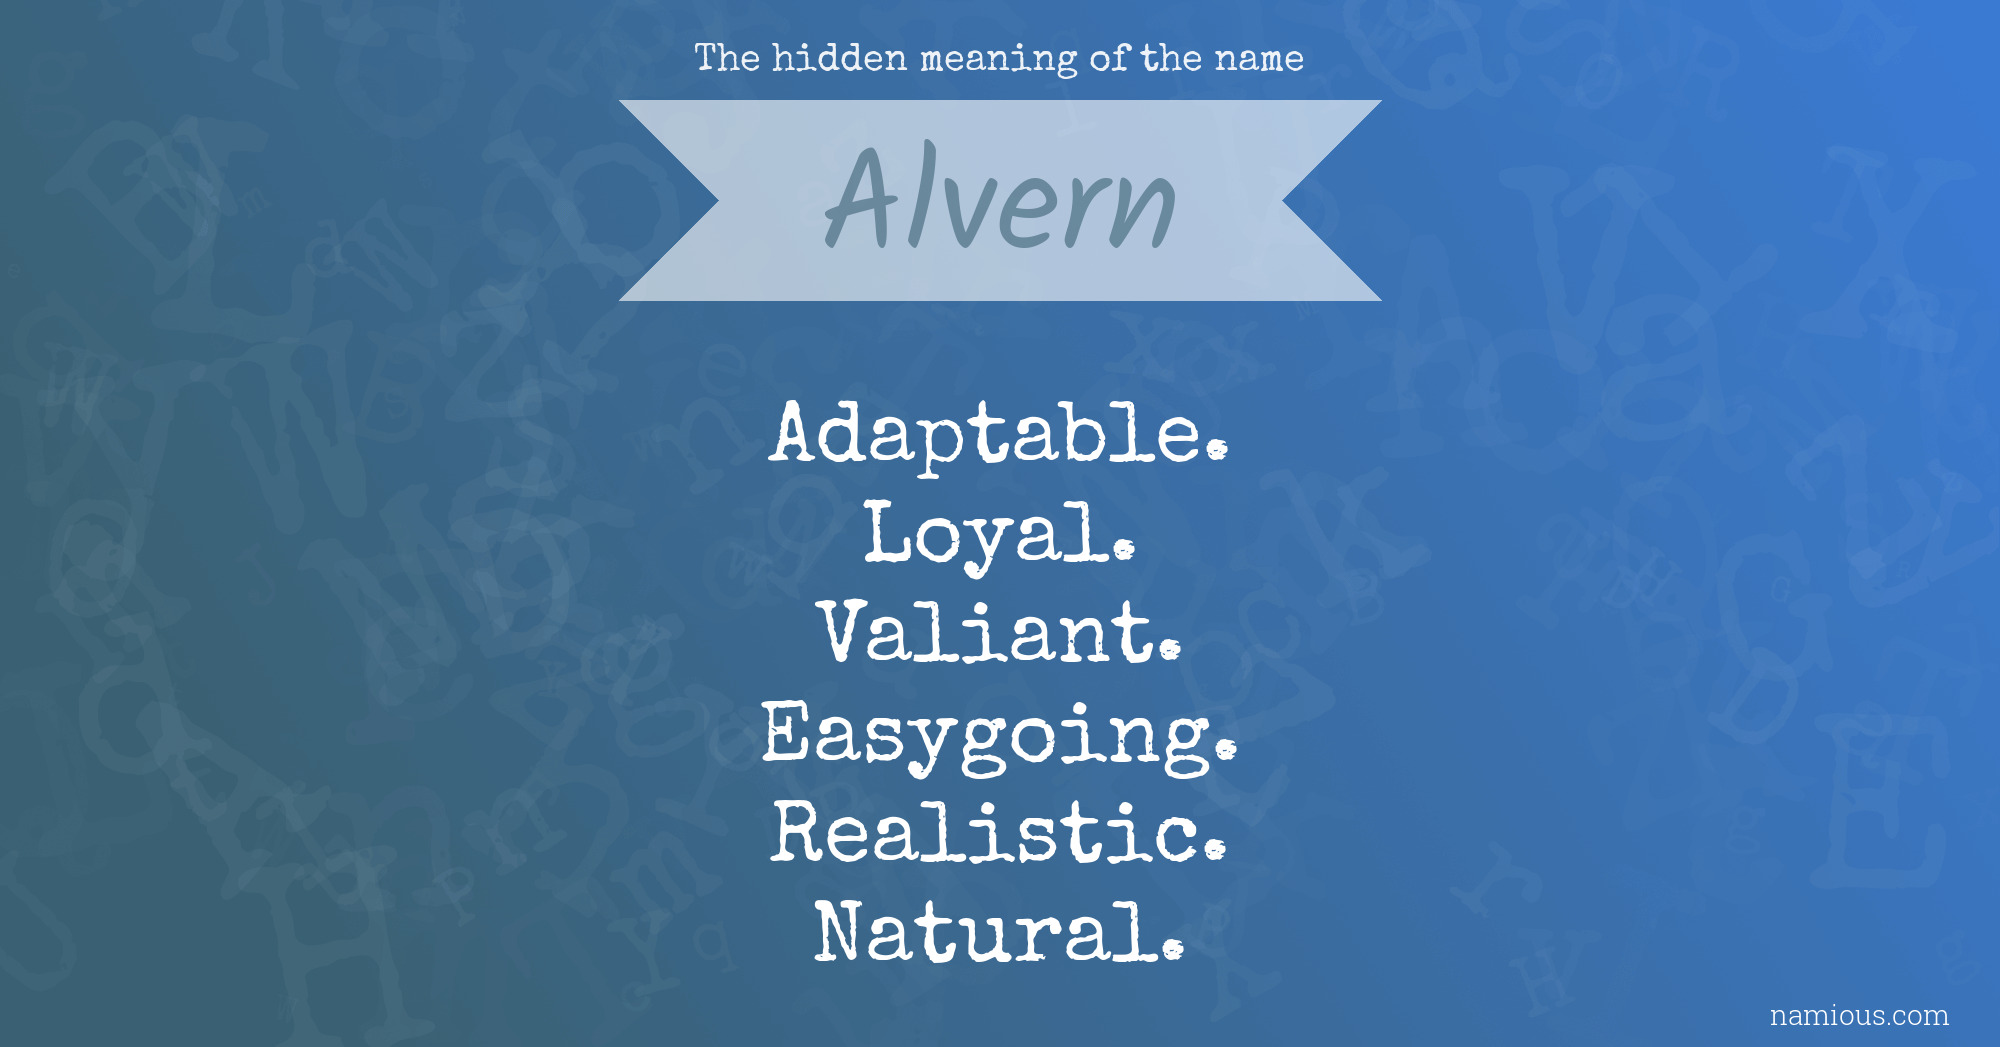 The hidden meaning of the name Alvern